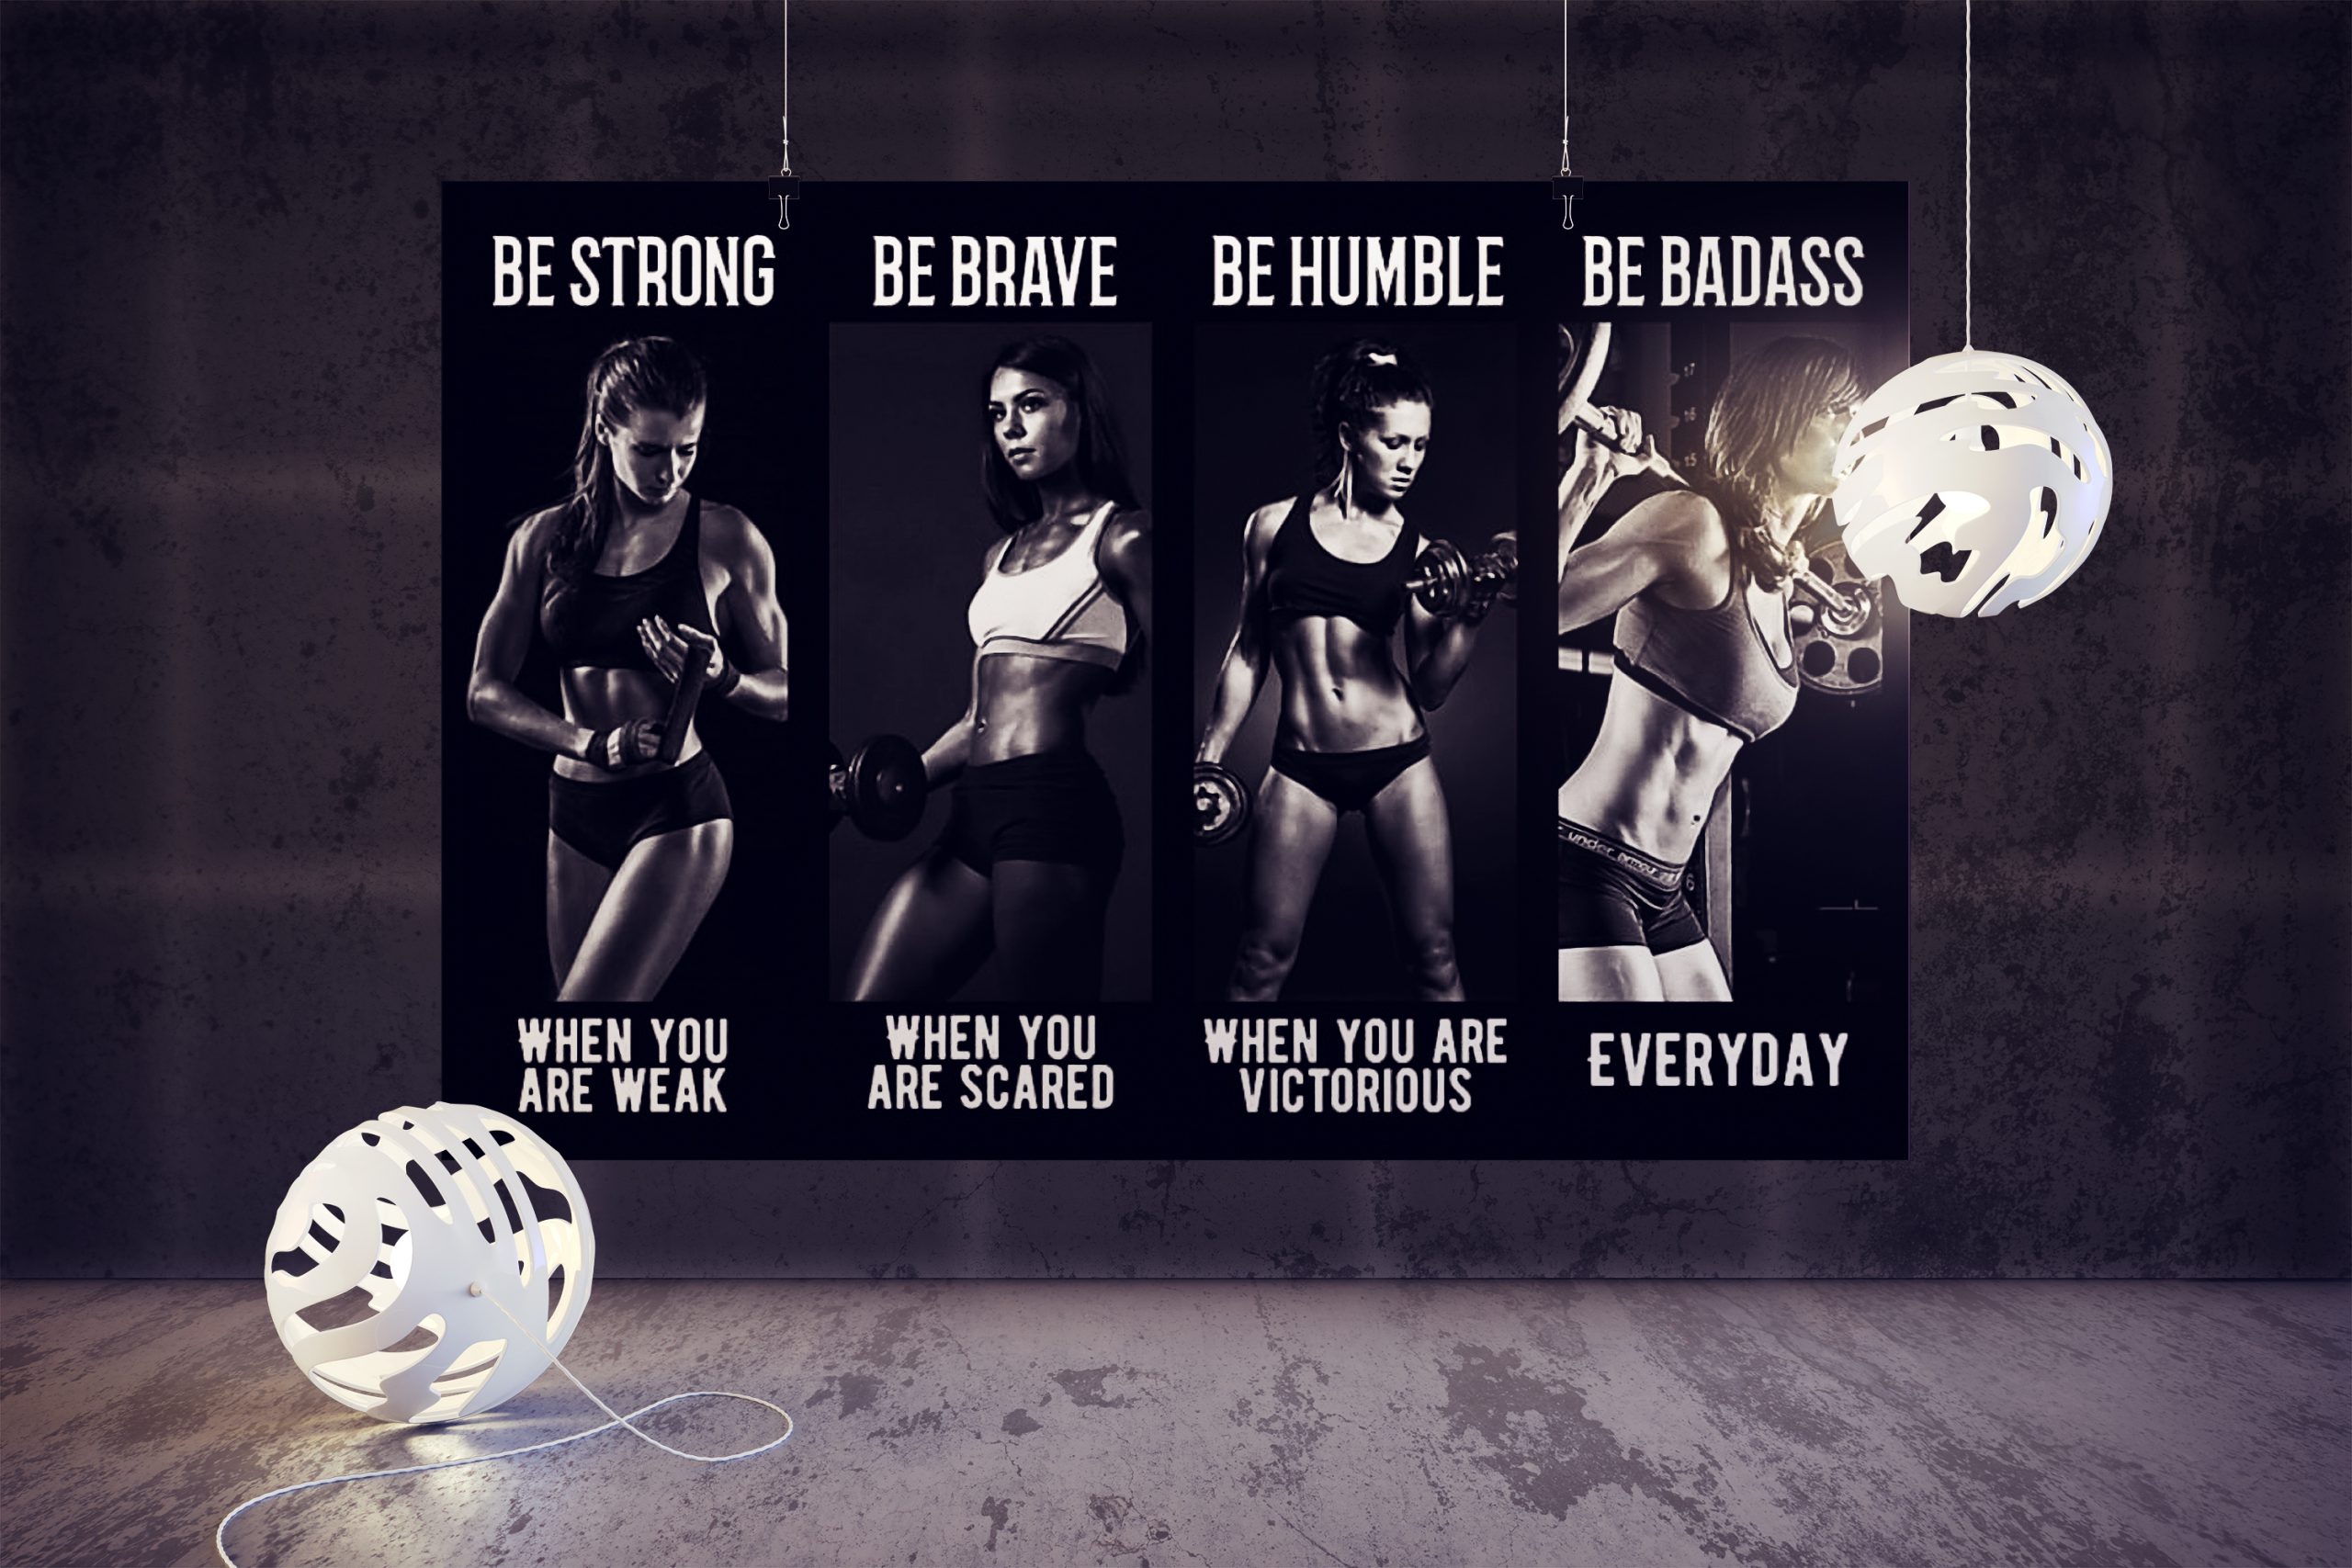 Bodybuilding Girl be strong be brave be humble be badass poster 2